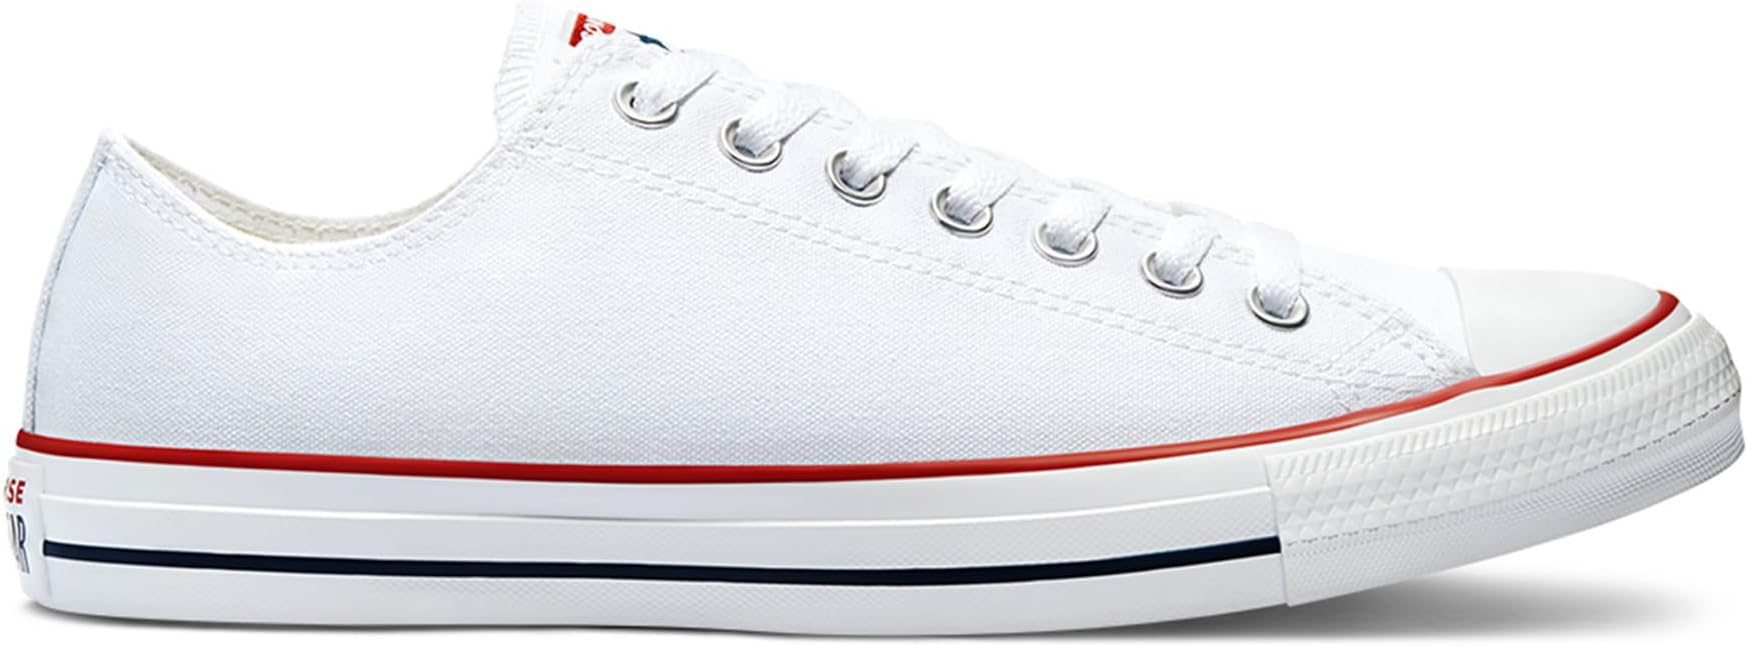 Converse Unisex Adult All Star '70s Low Top Sneakers